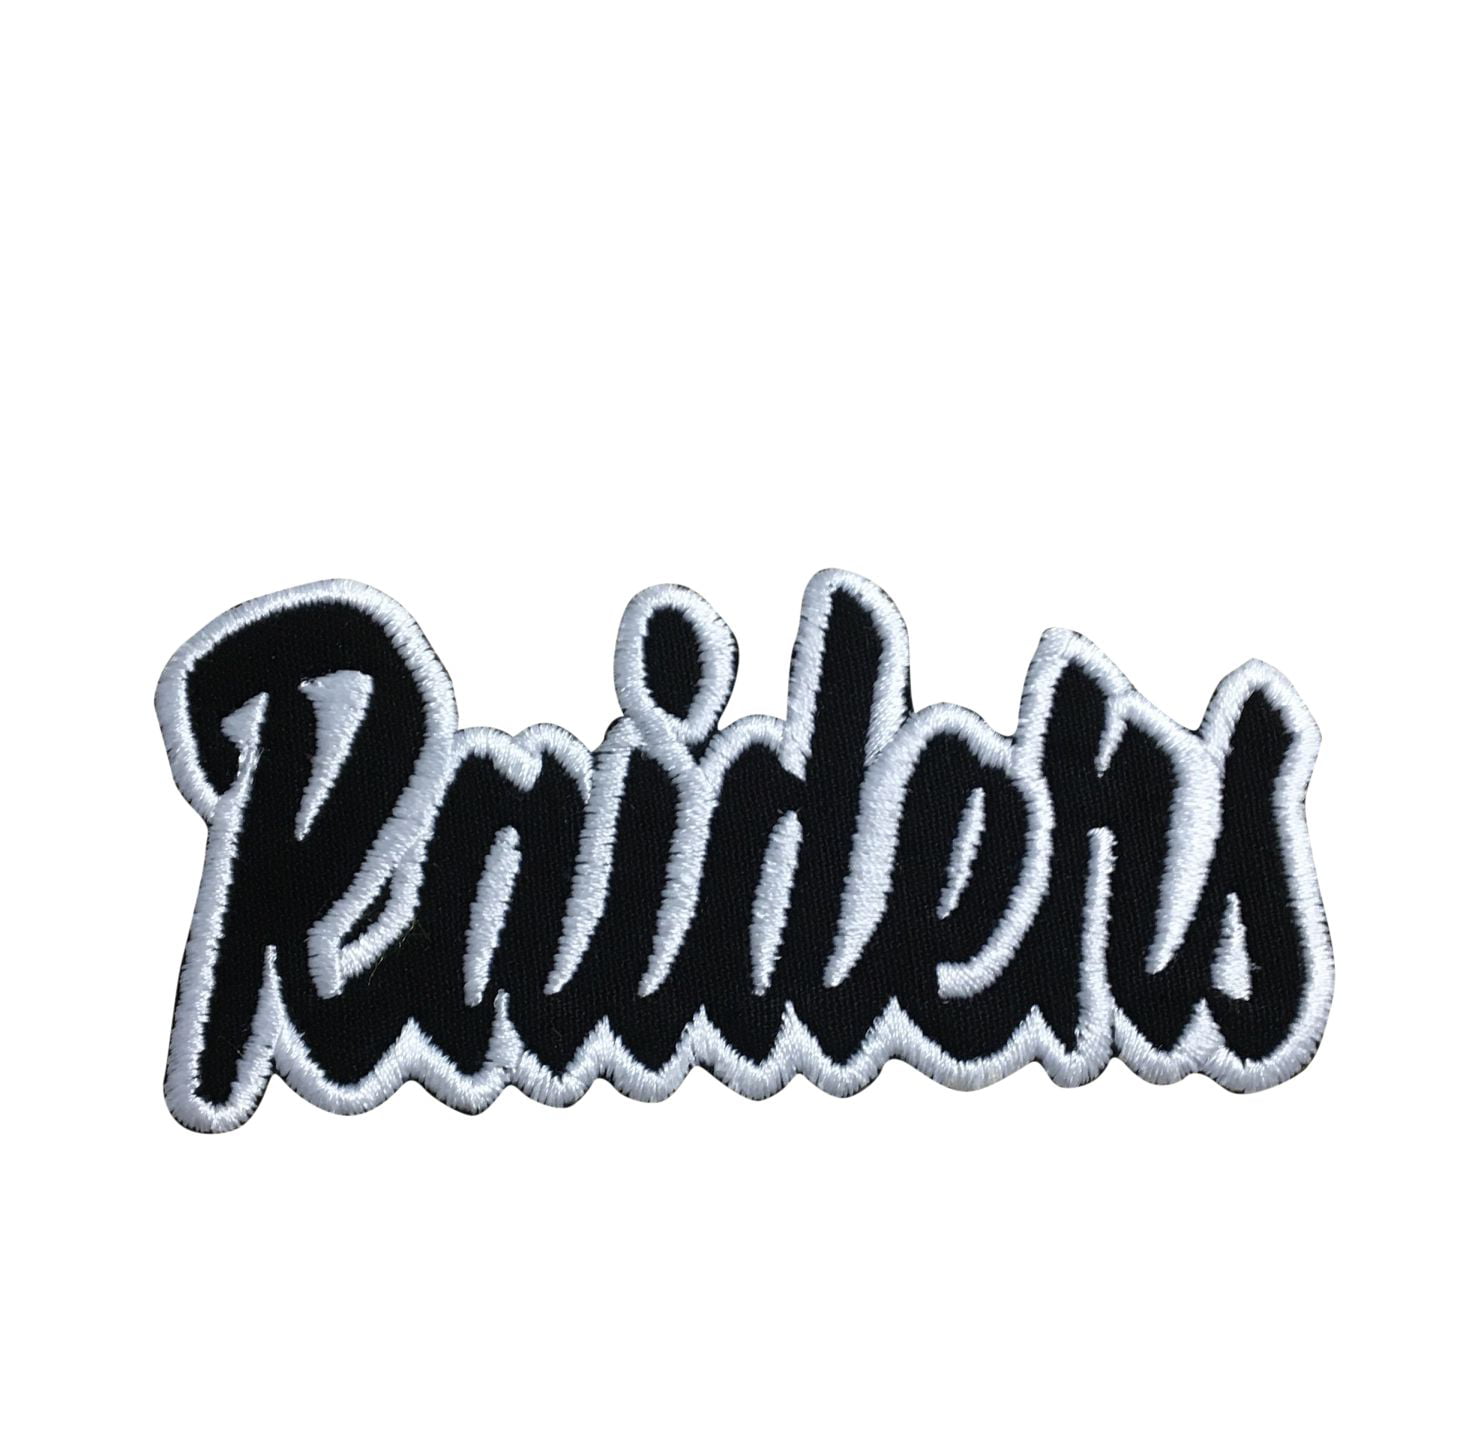 VINTAGE IRON ON EMBROIDED PATCH OAKLAND RAIDERS 3"Round  A1 QUALITY 